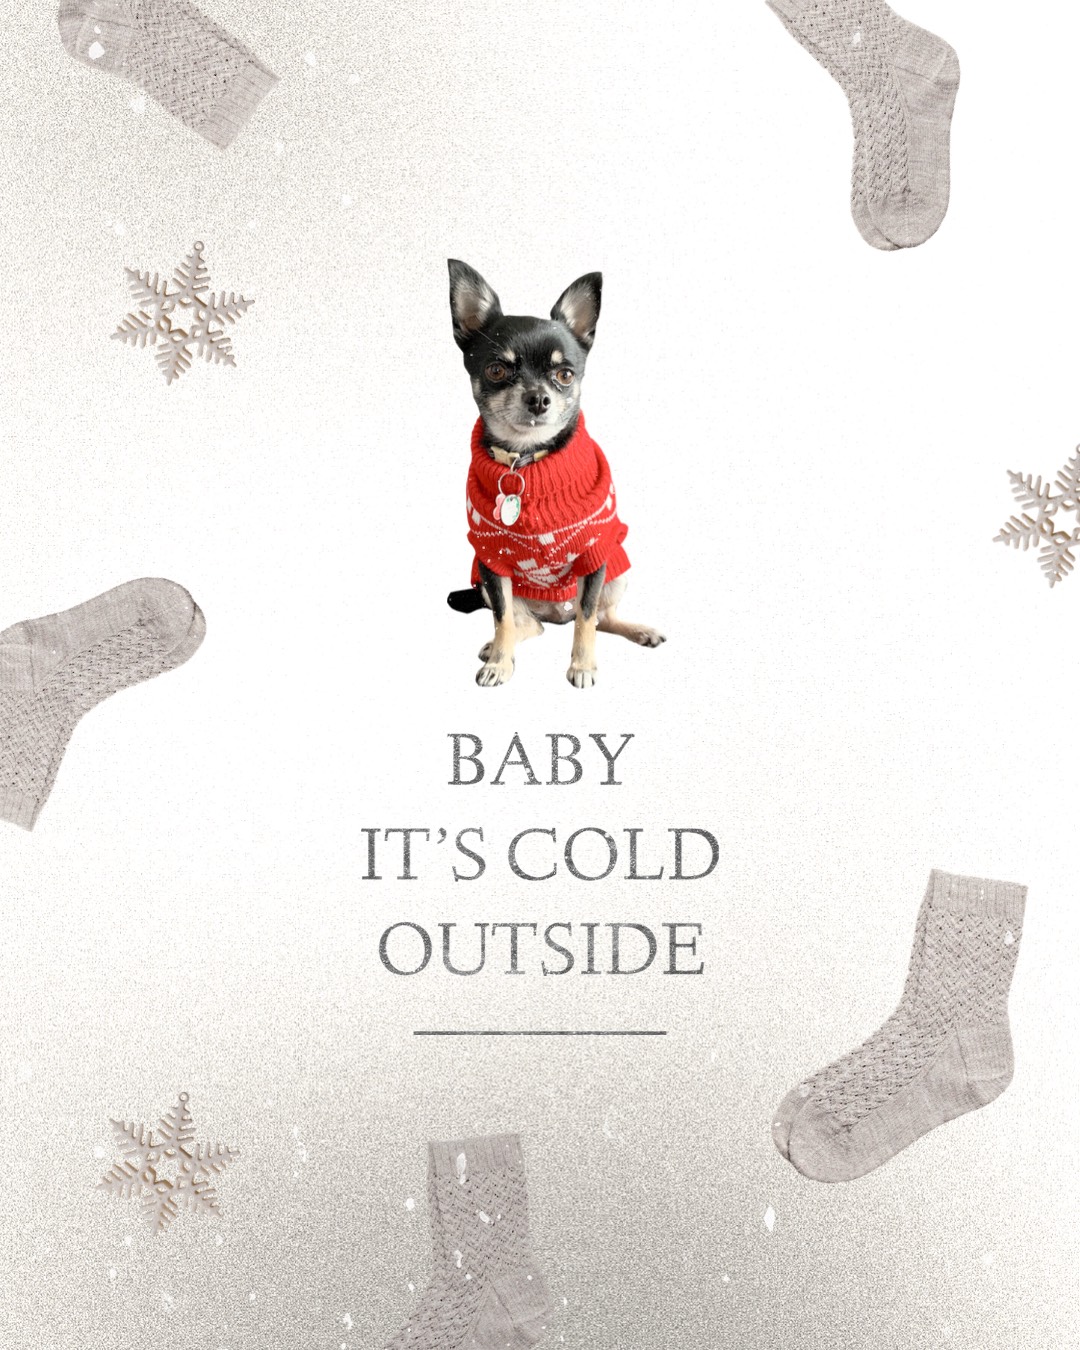 Baby it's cold outside! Dog with socks and snowflakes pattern Winter Wonderland template